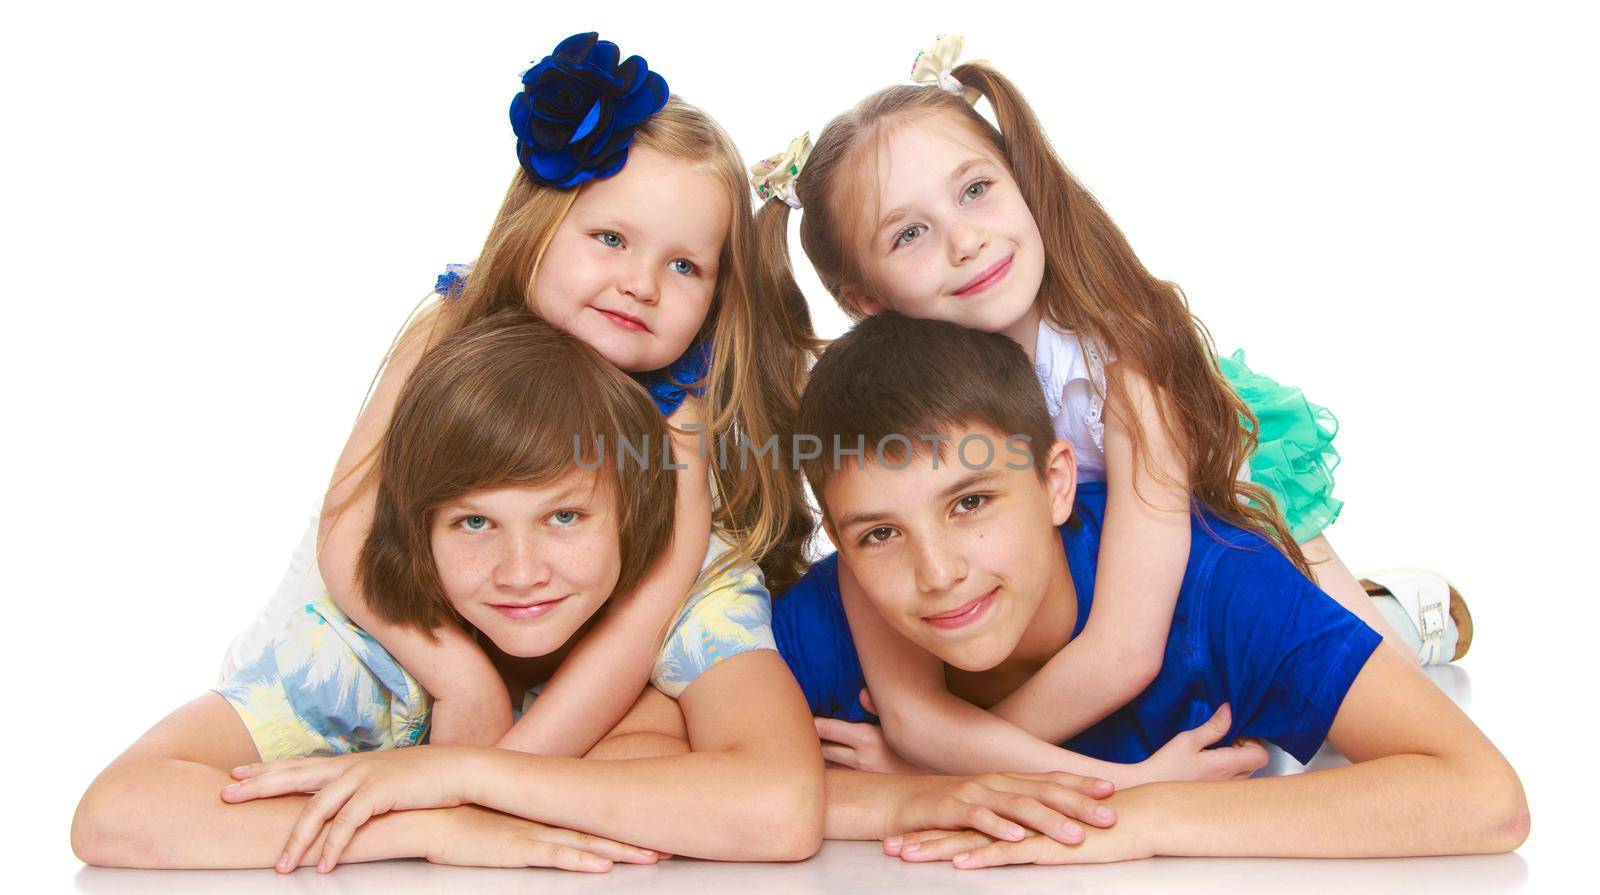 Horizontally elongated rectangular frame. Two little girls sisters lie on top of his brothers and hugging them around the neck. The picture shows 4 children - Isolated on white background